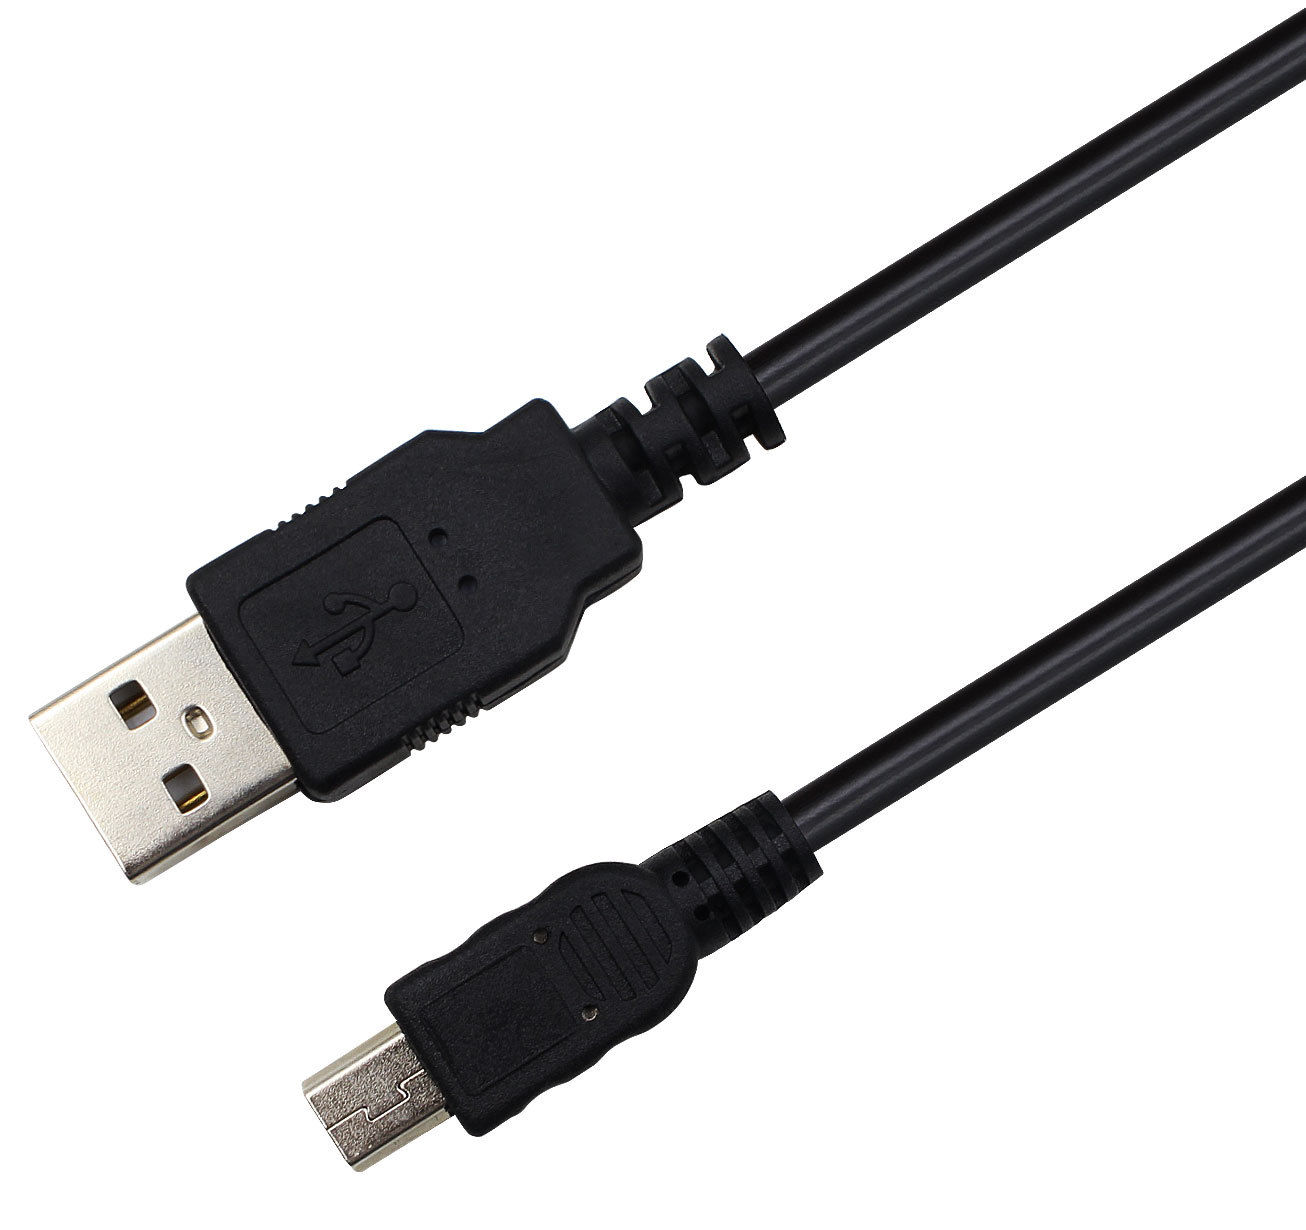 CA-190CD Power Cord Cable Wire